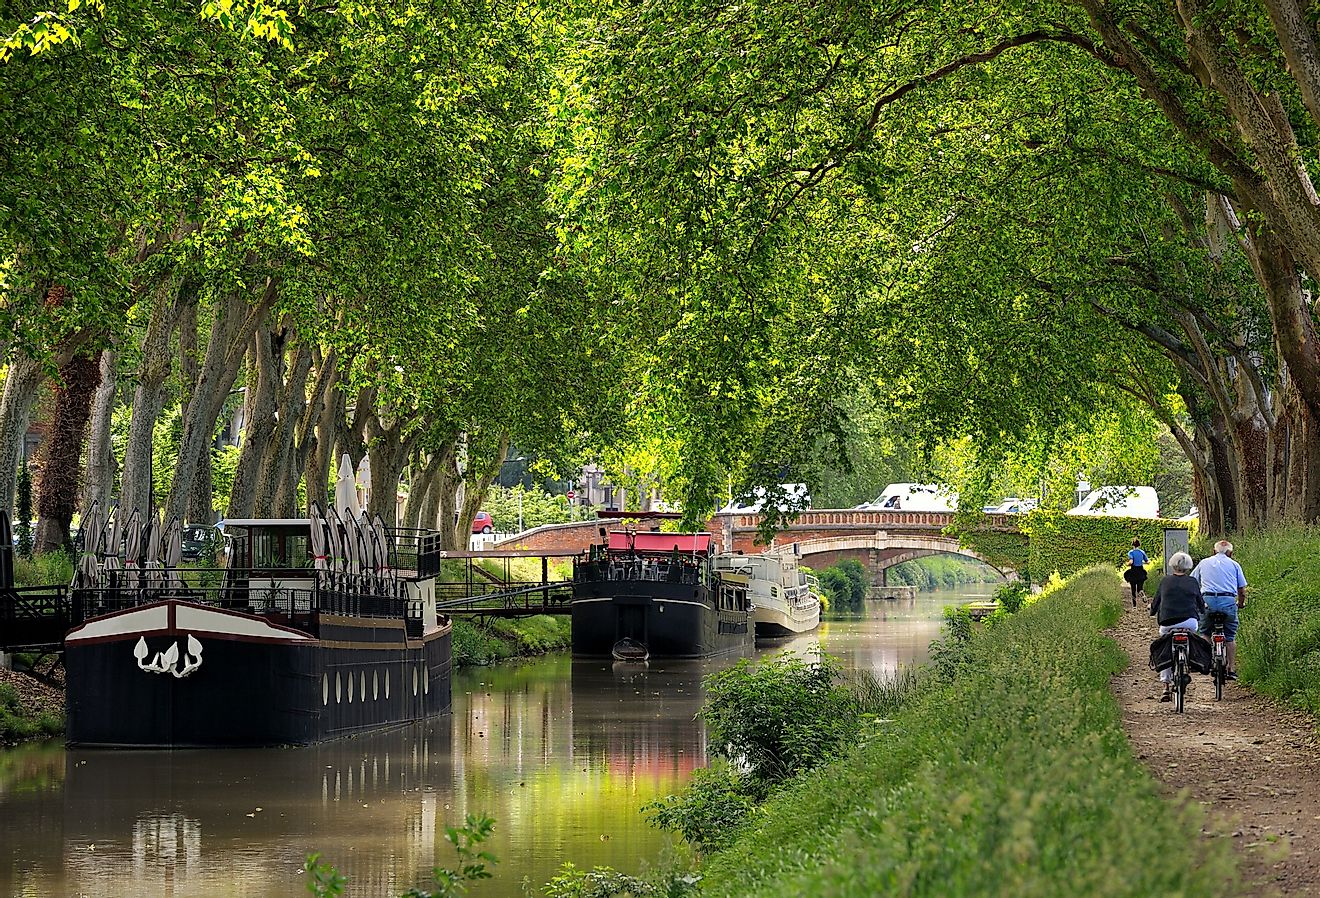 Cyclists and pedestrians line the Canal du Midi. Image credit thieury via Shutterstock.